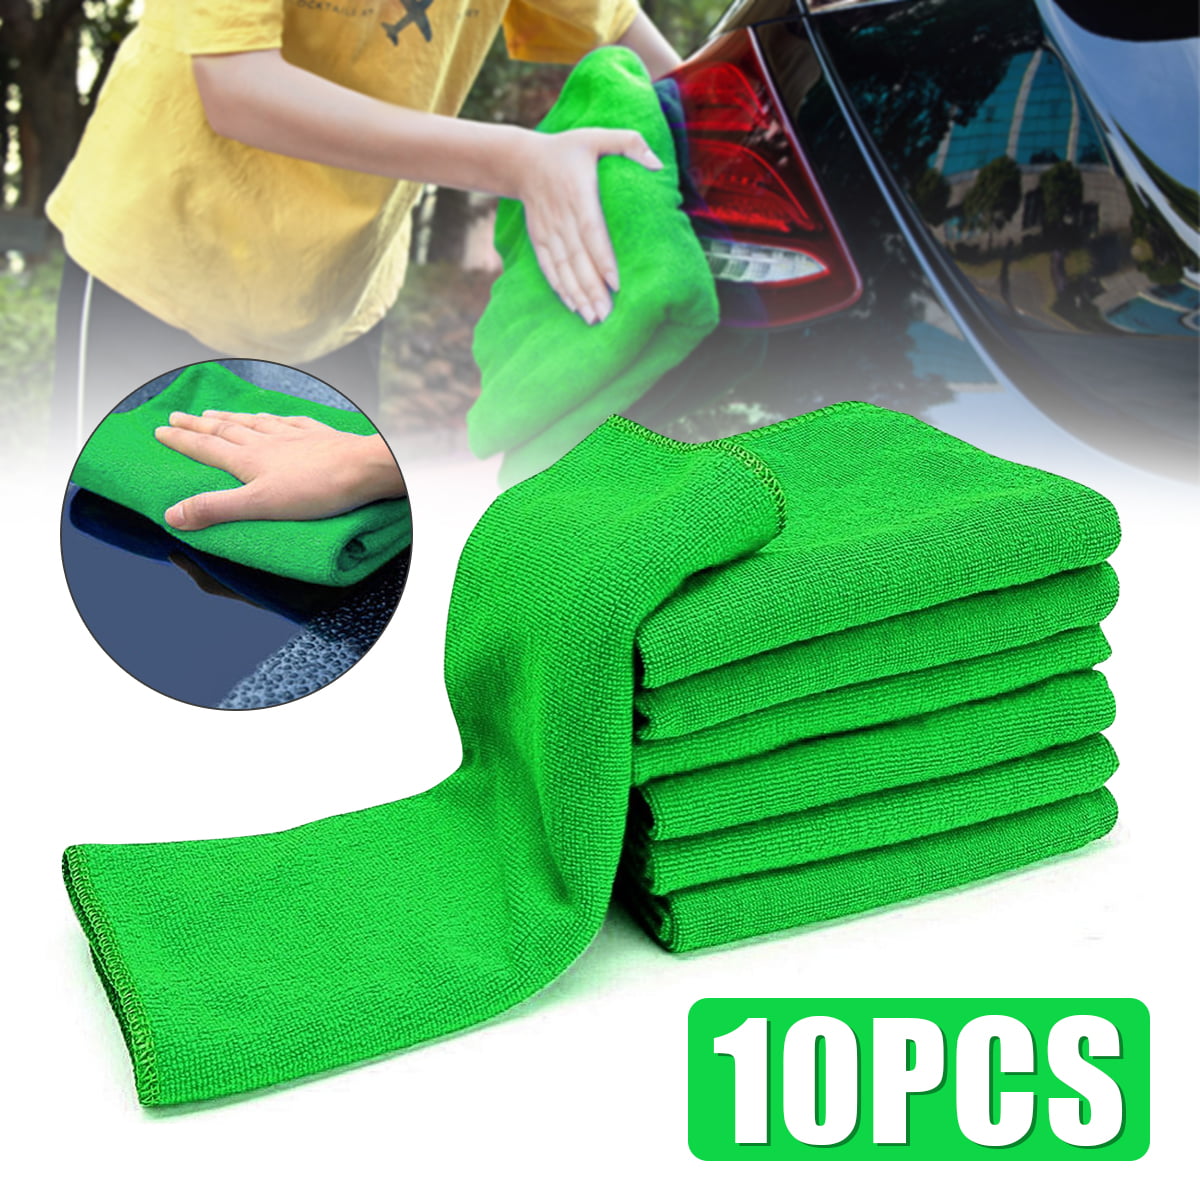 1-10PCS Green Thicken Microfiber Cleaning Towel Car Wash Cleaner Clean Cloth 